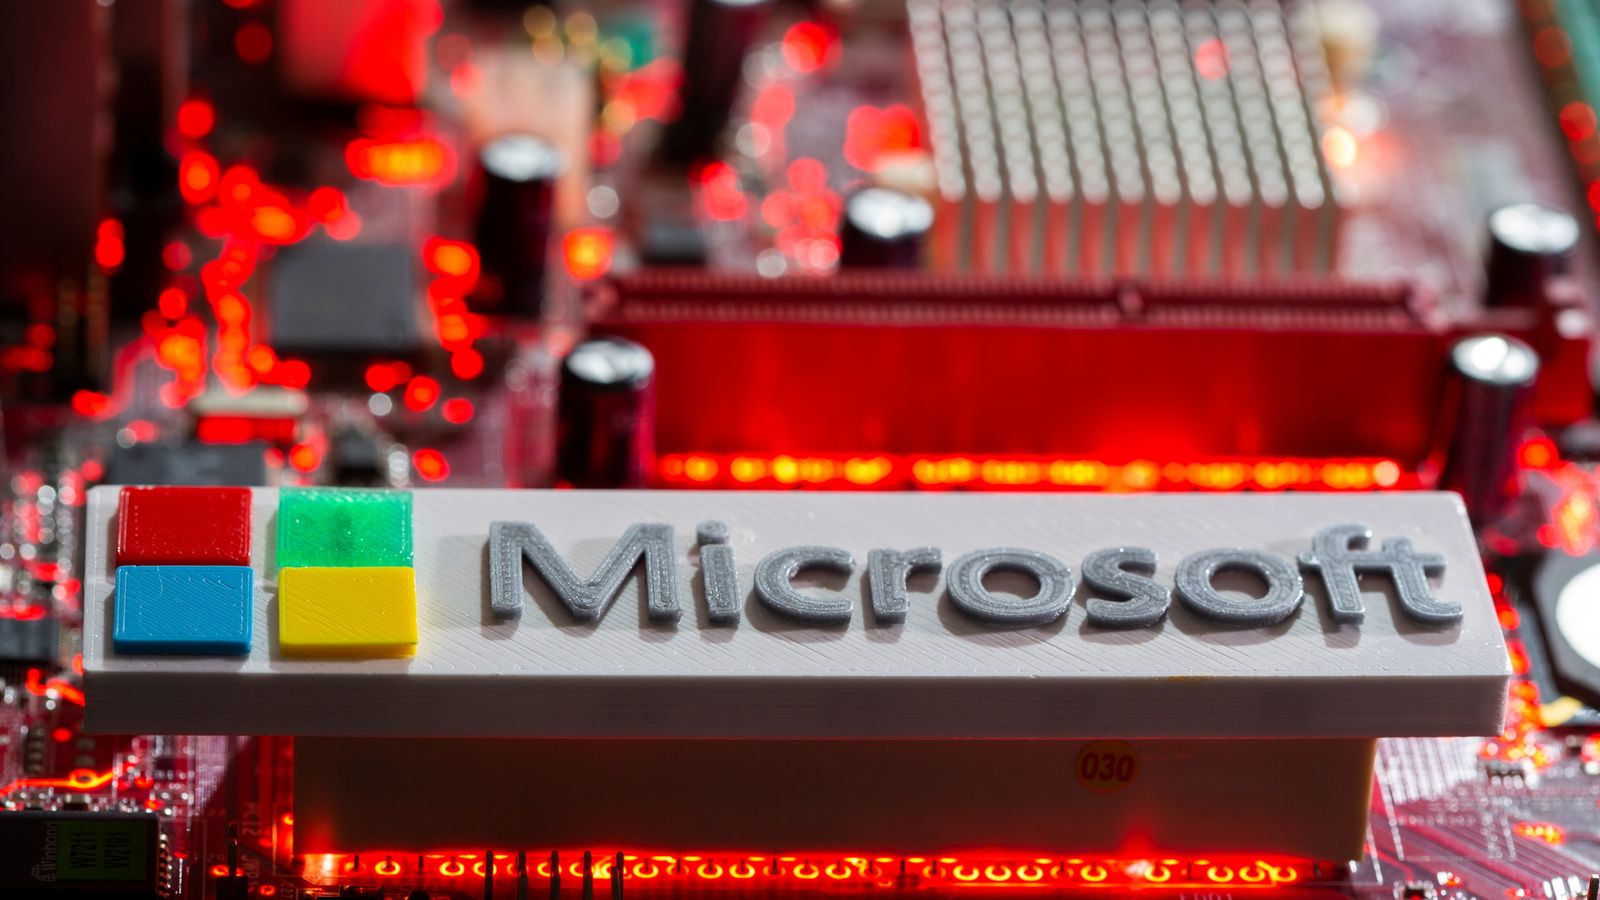 German cybersecurity officials looking into 'culprits' behind Microsoft outage